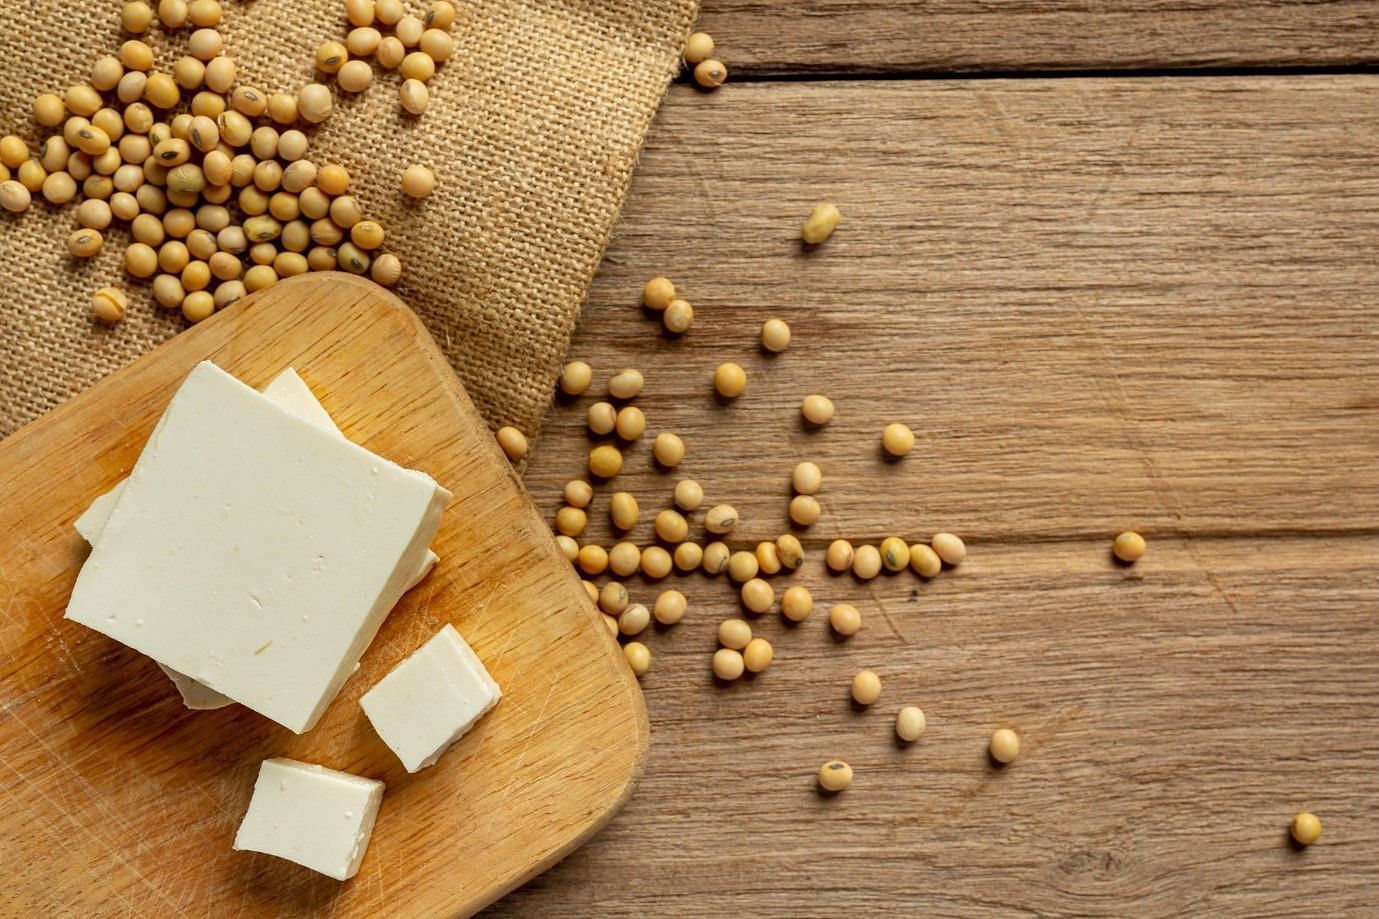 Due to increase in the &lsquo;Vegan-Culture&rsquo;, Soy products are becoming increasingly popular (Image by Jcomp on Freepik)